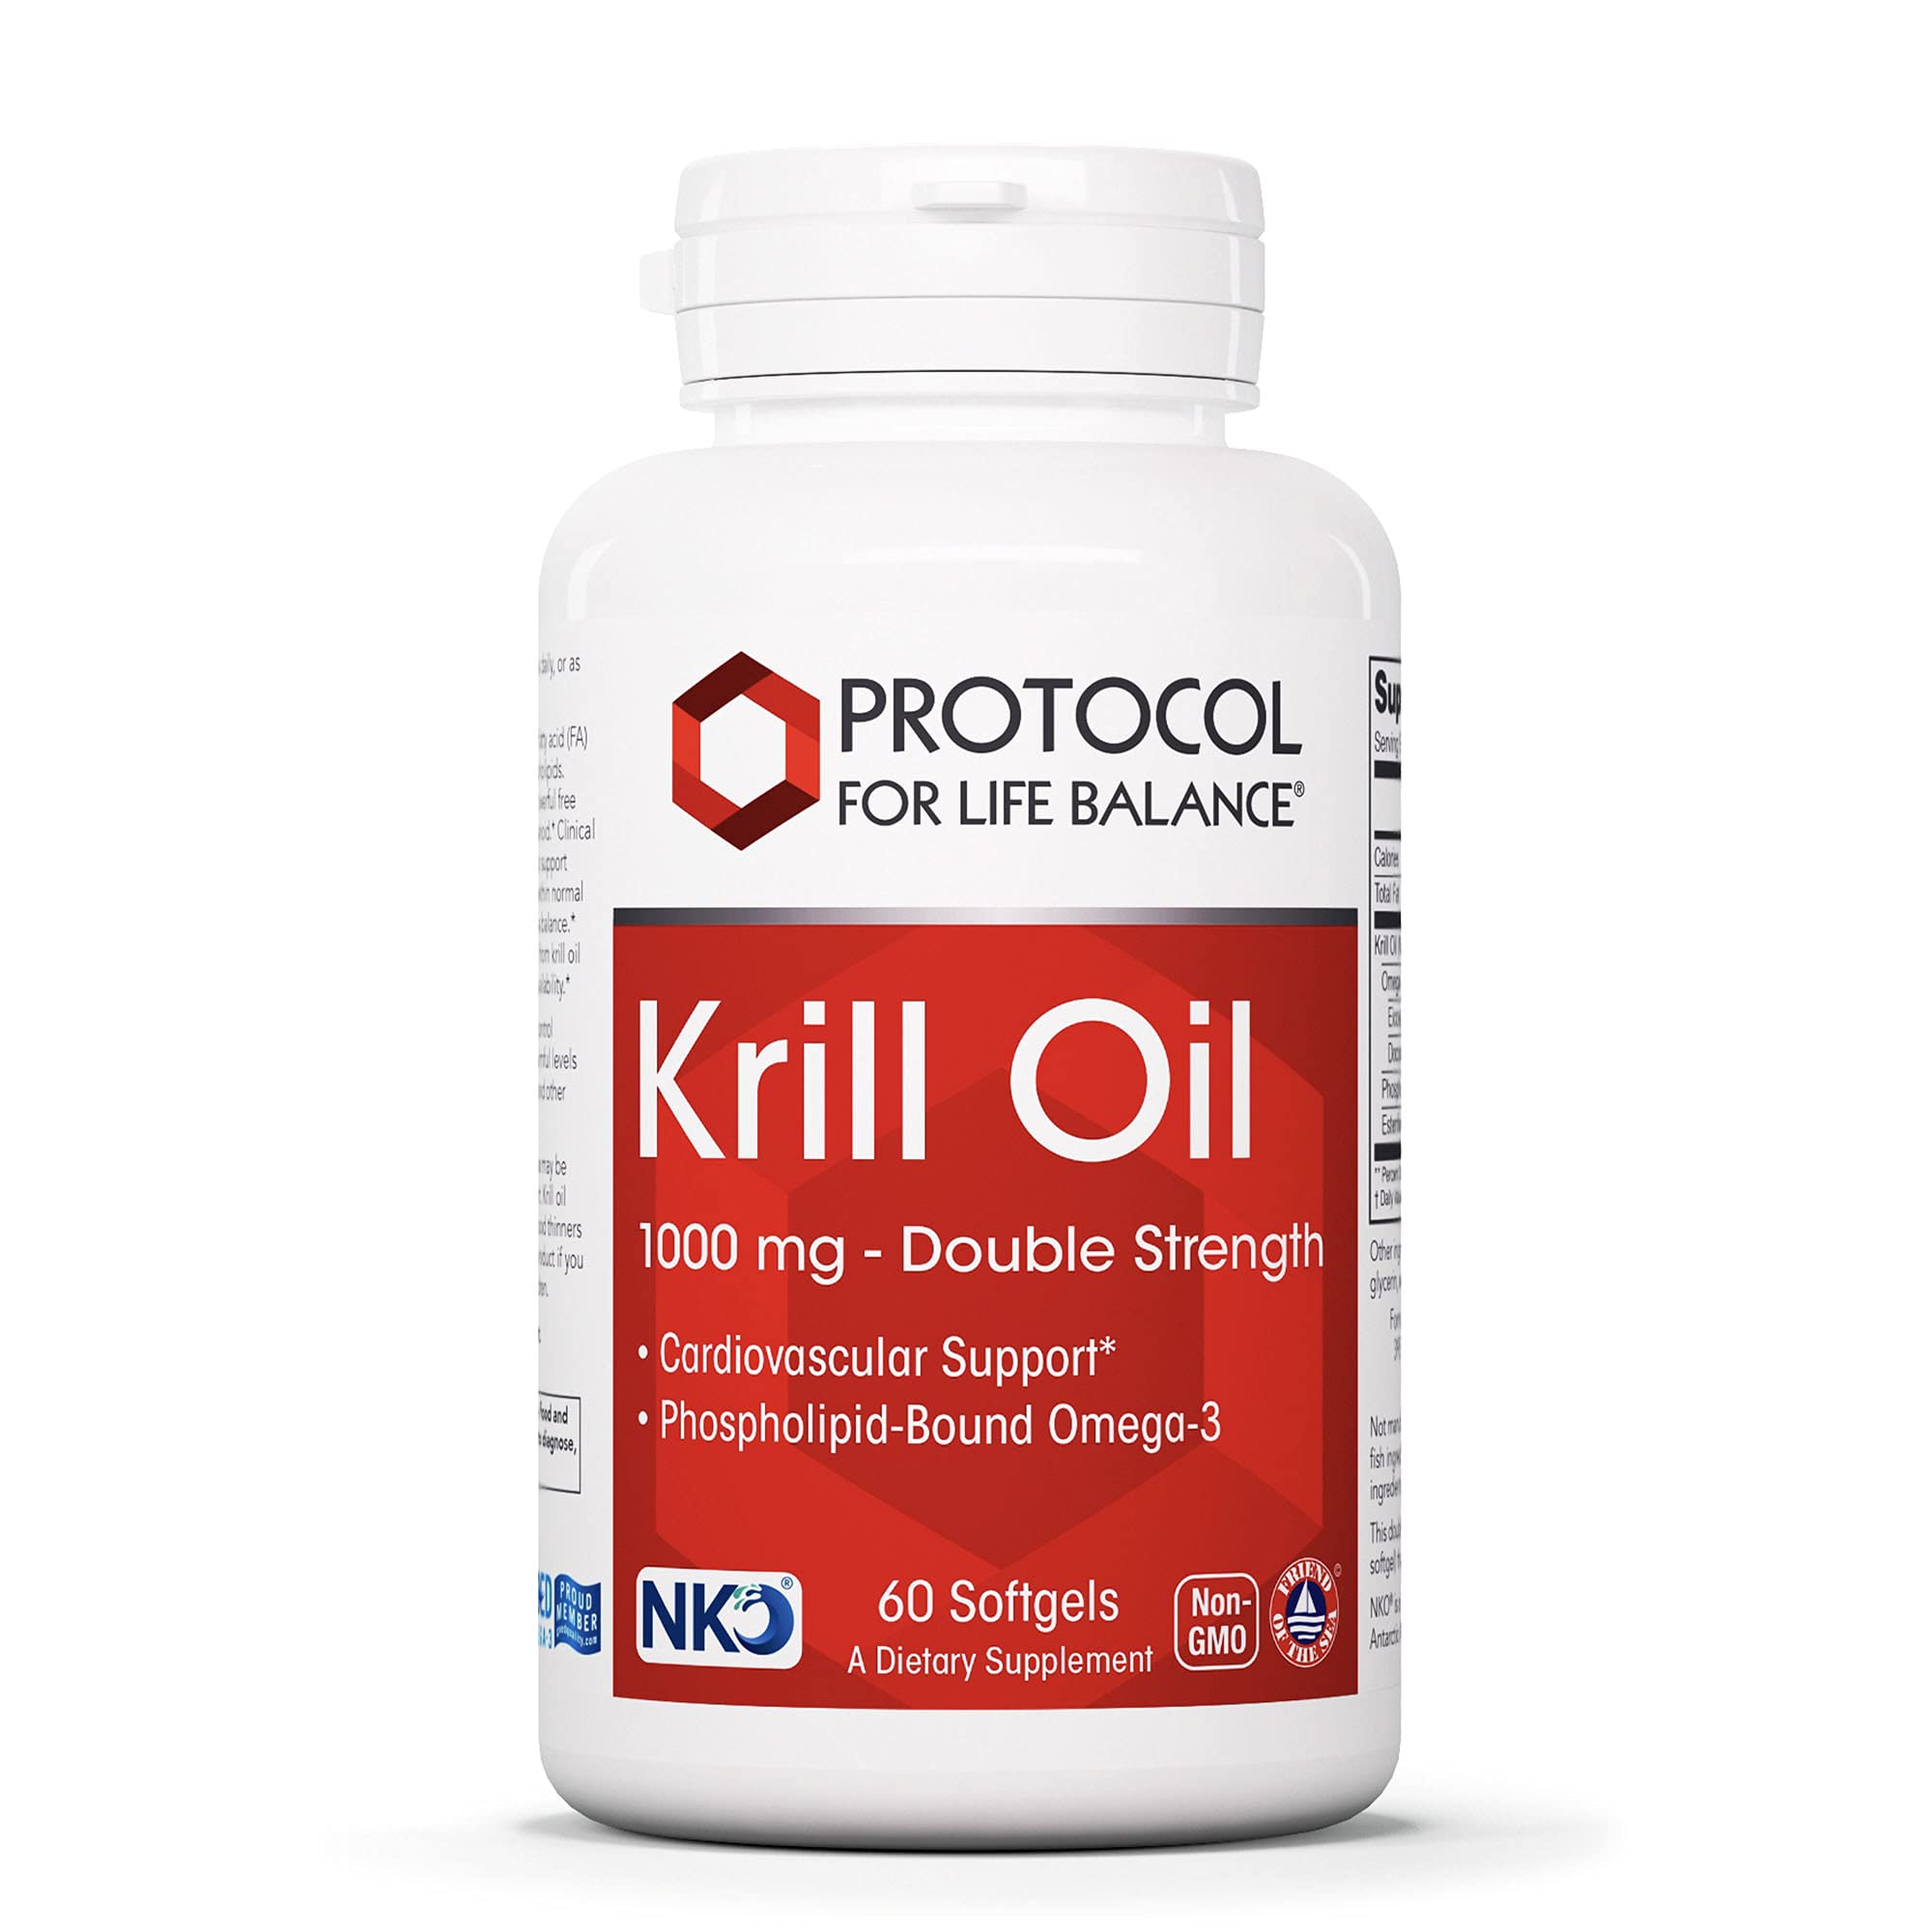 Protocol Krill Oil 1,000mg - Omega-3 - Heart, Brain, and Joint Health - 60 Softgels